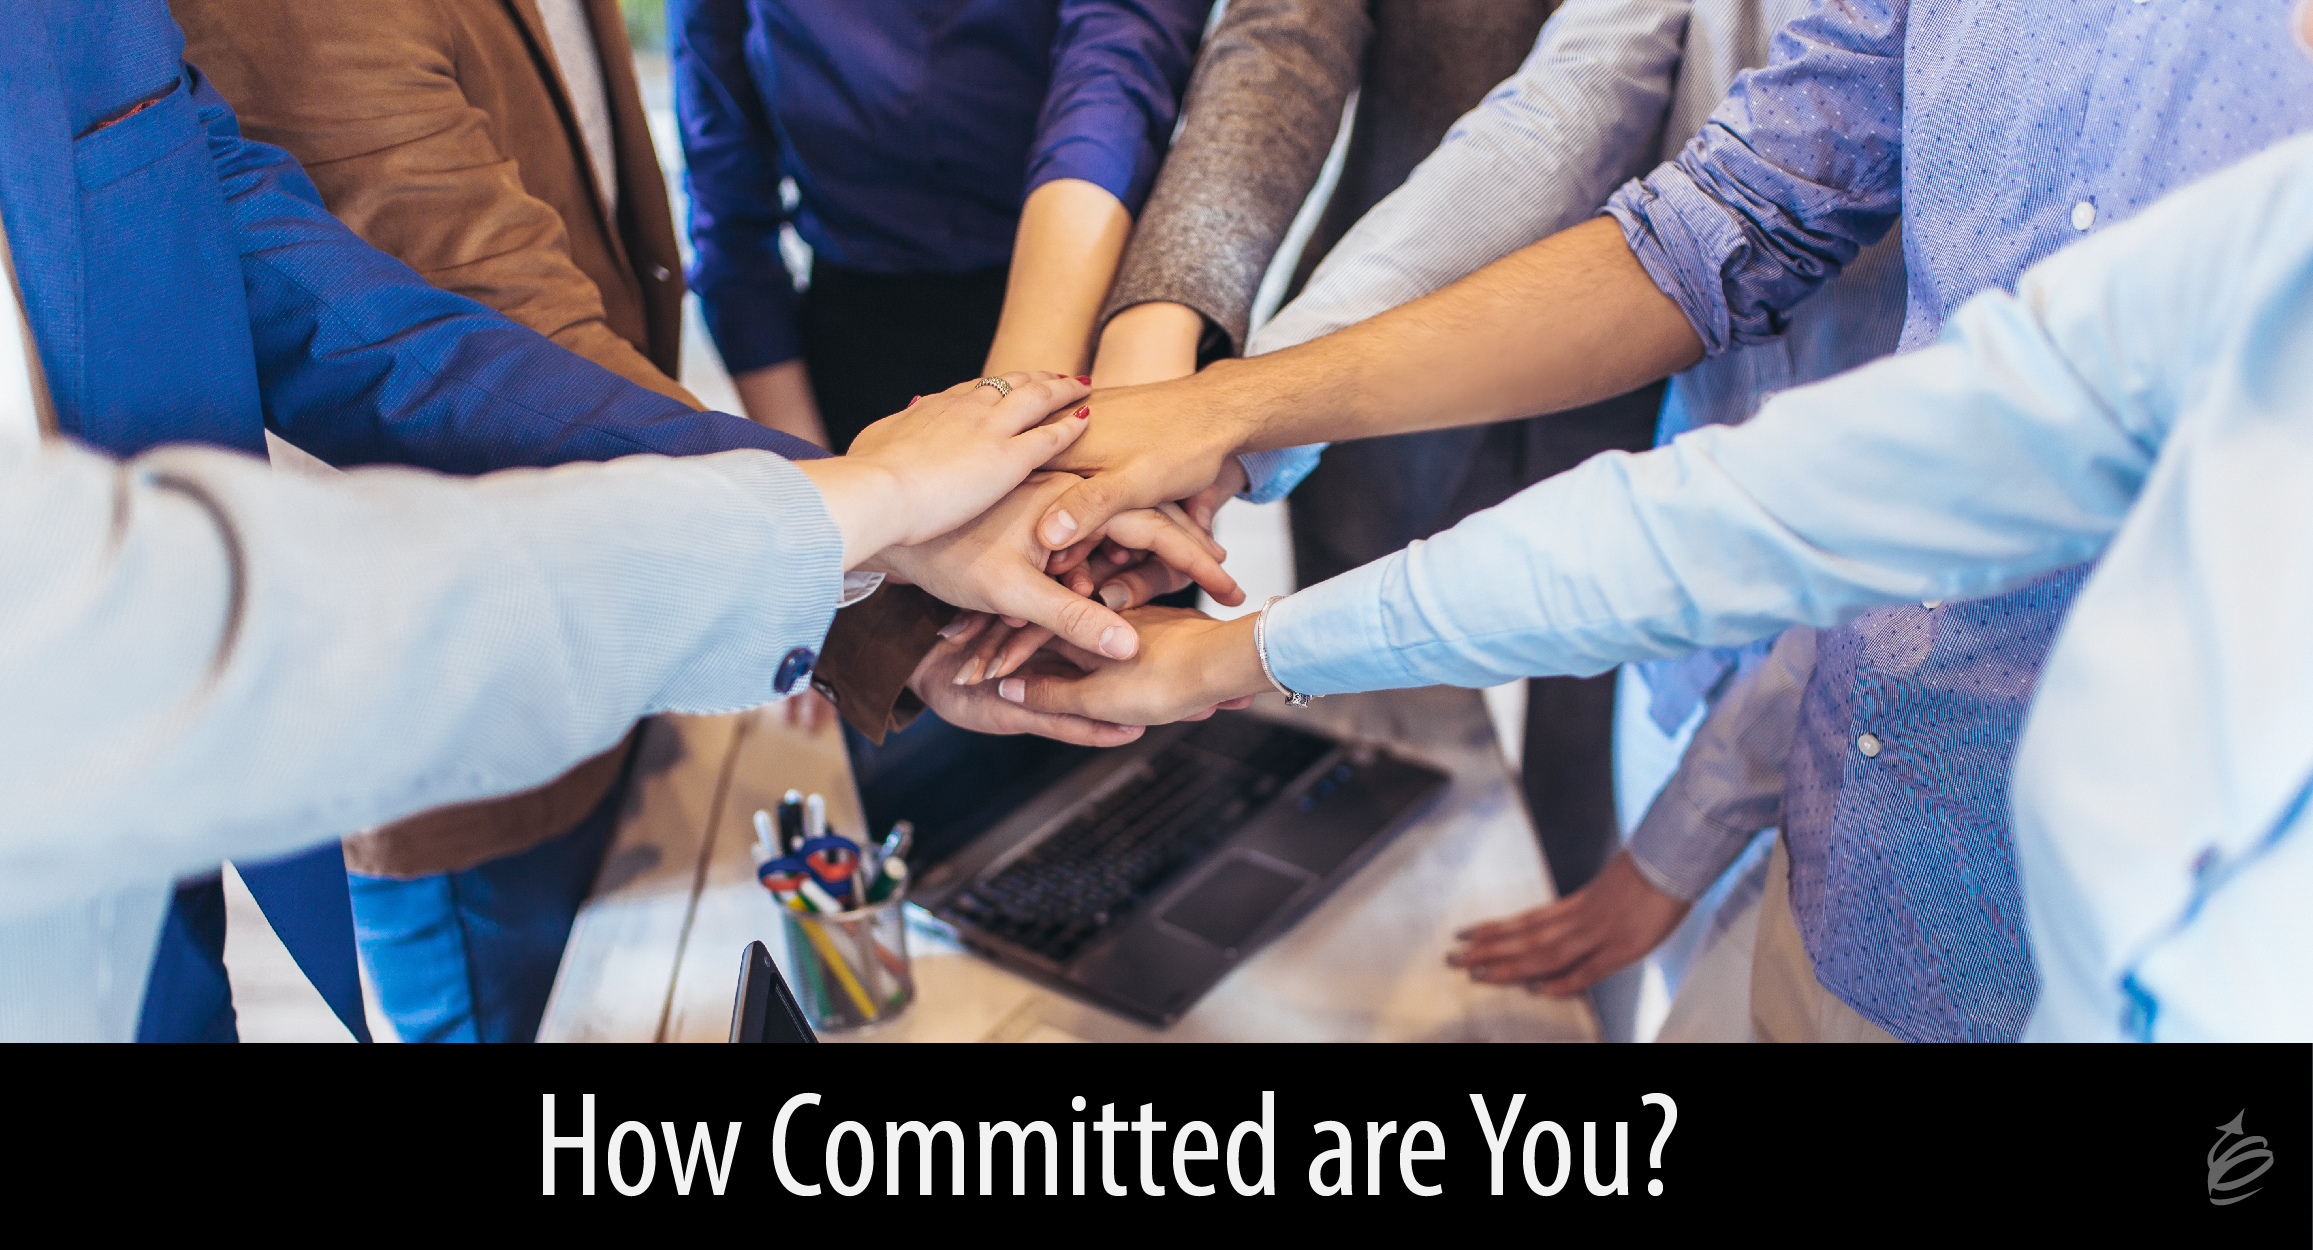 Commitment questions for Leaders